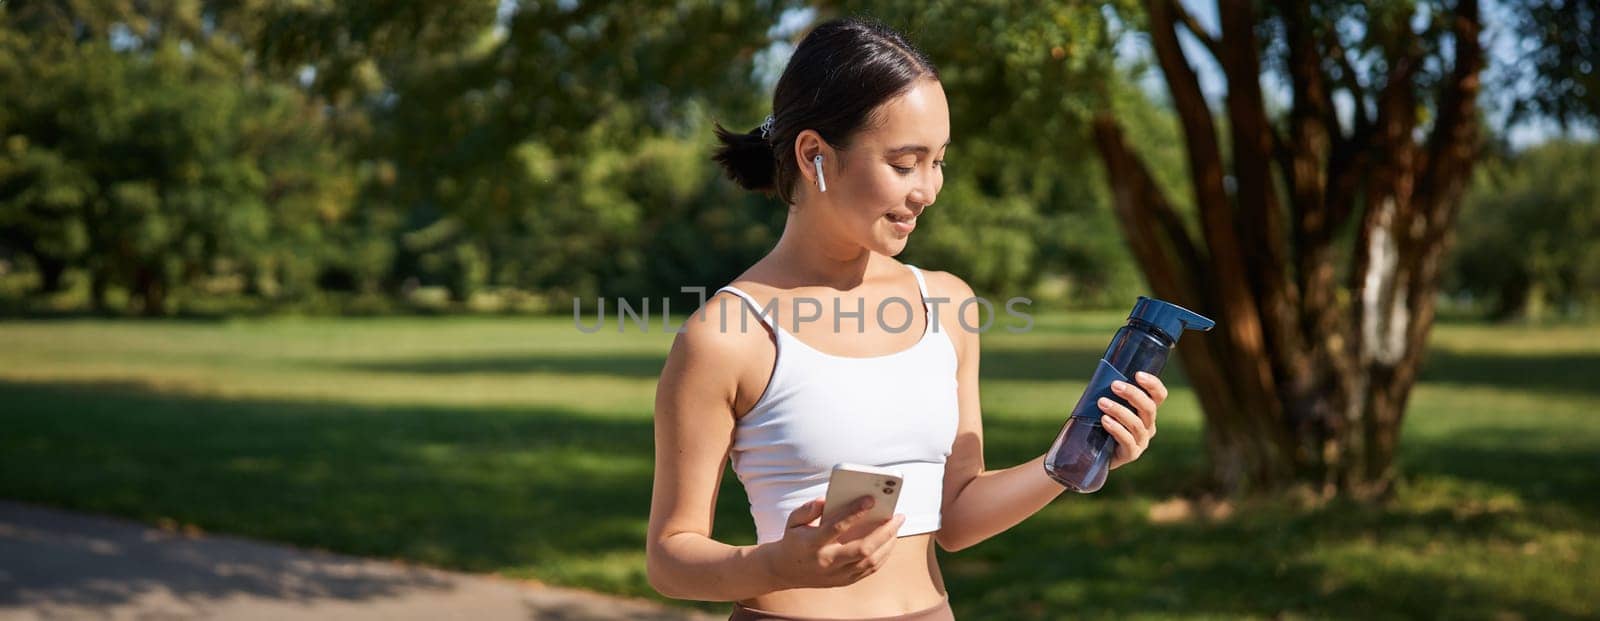 Portrait of fitness girl, runner drinking water, looking at smartphone, standing in park in middle of workout, sport training session.